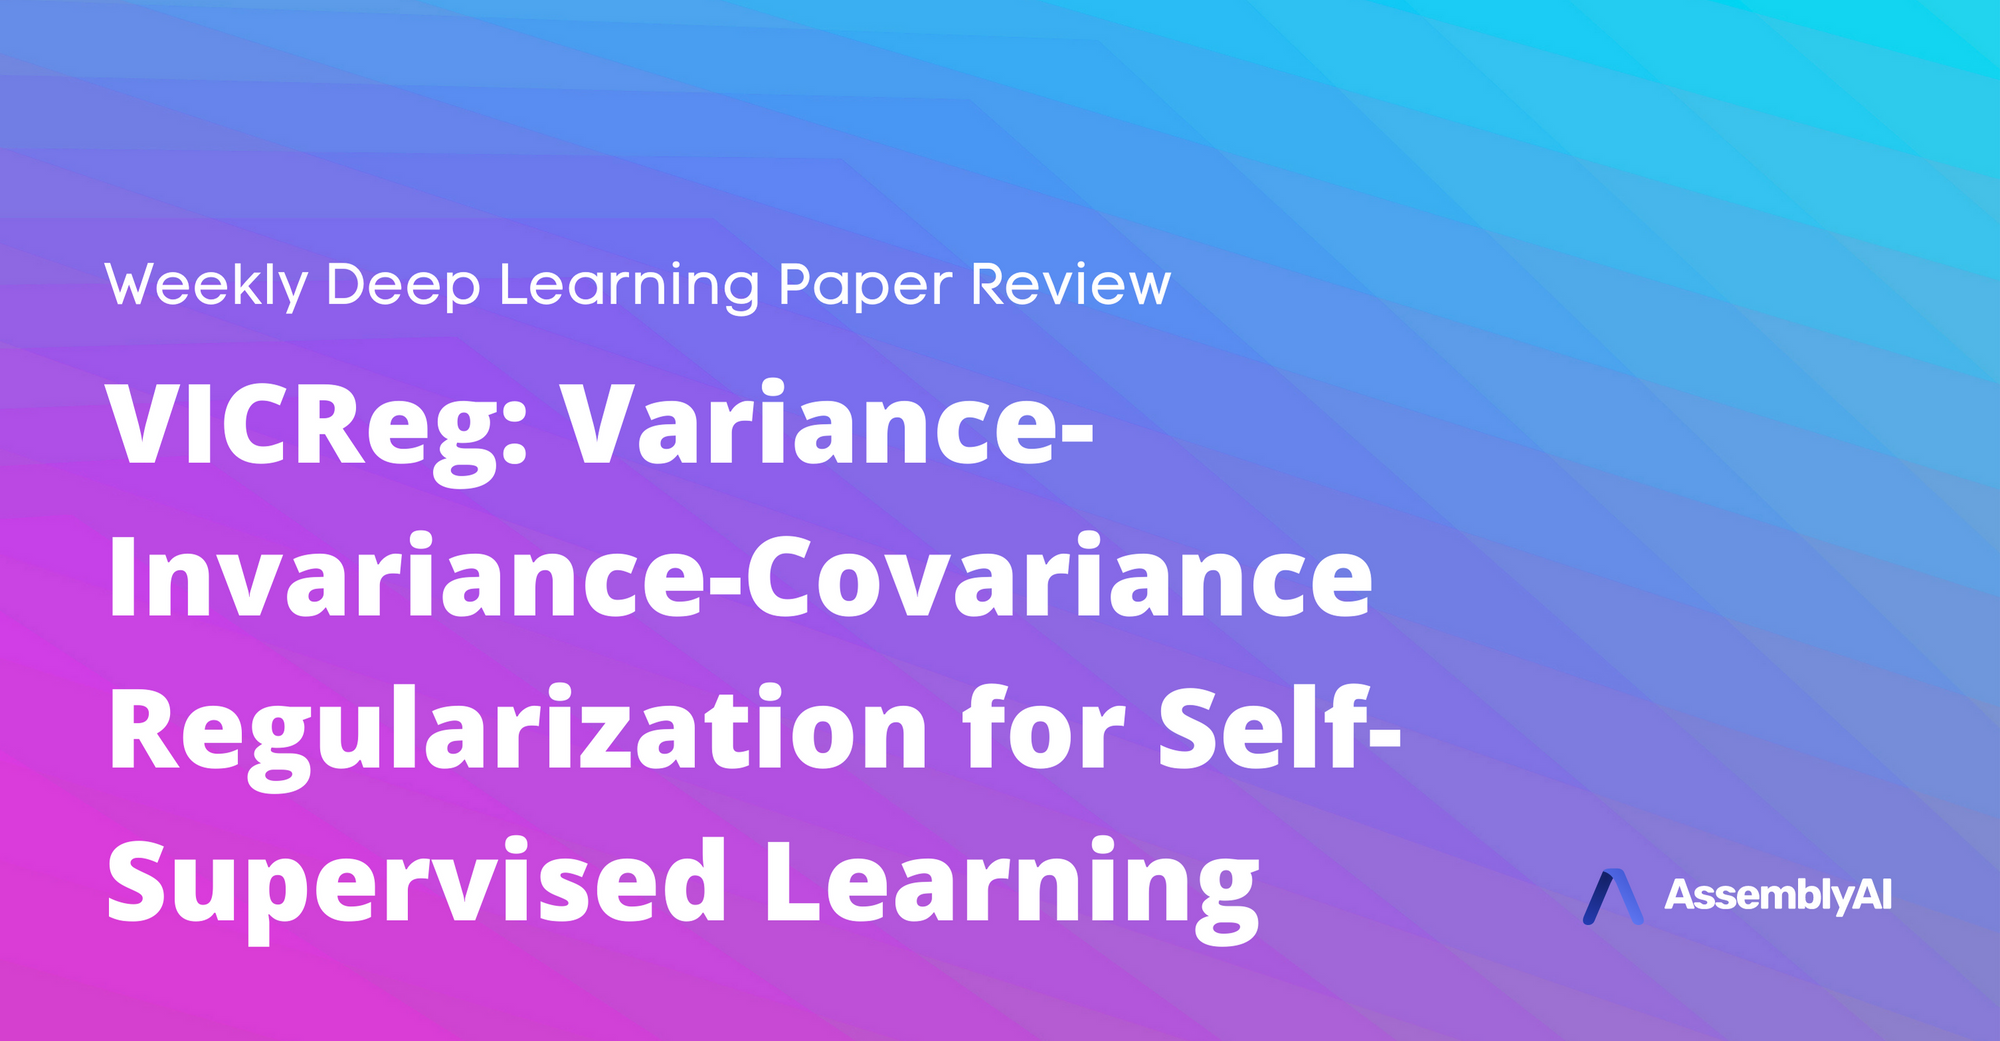 Review - VICReg: Variance-Invariance-Covariance Regularization for Self-Supervised Learning